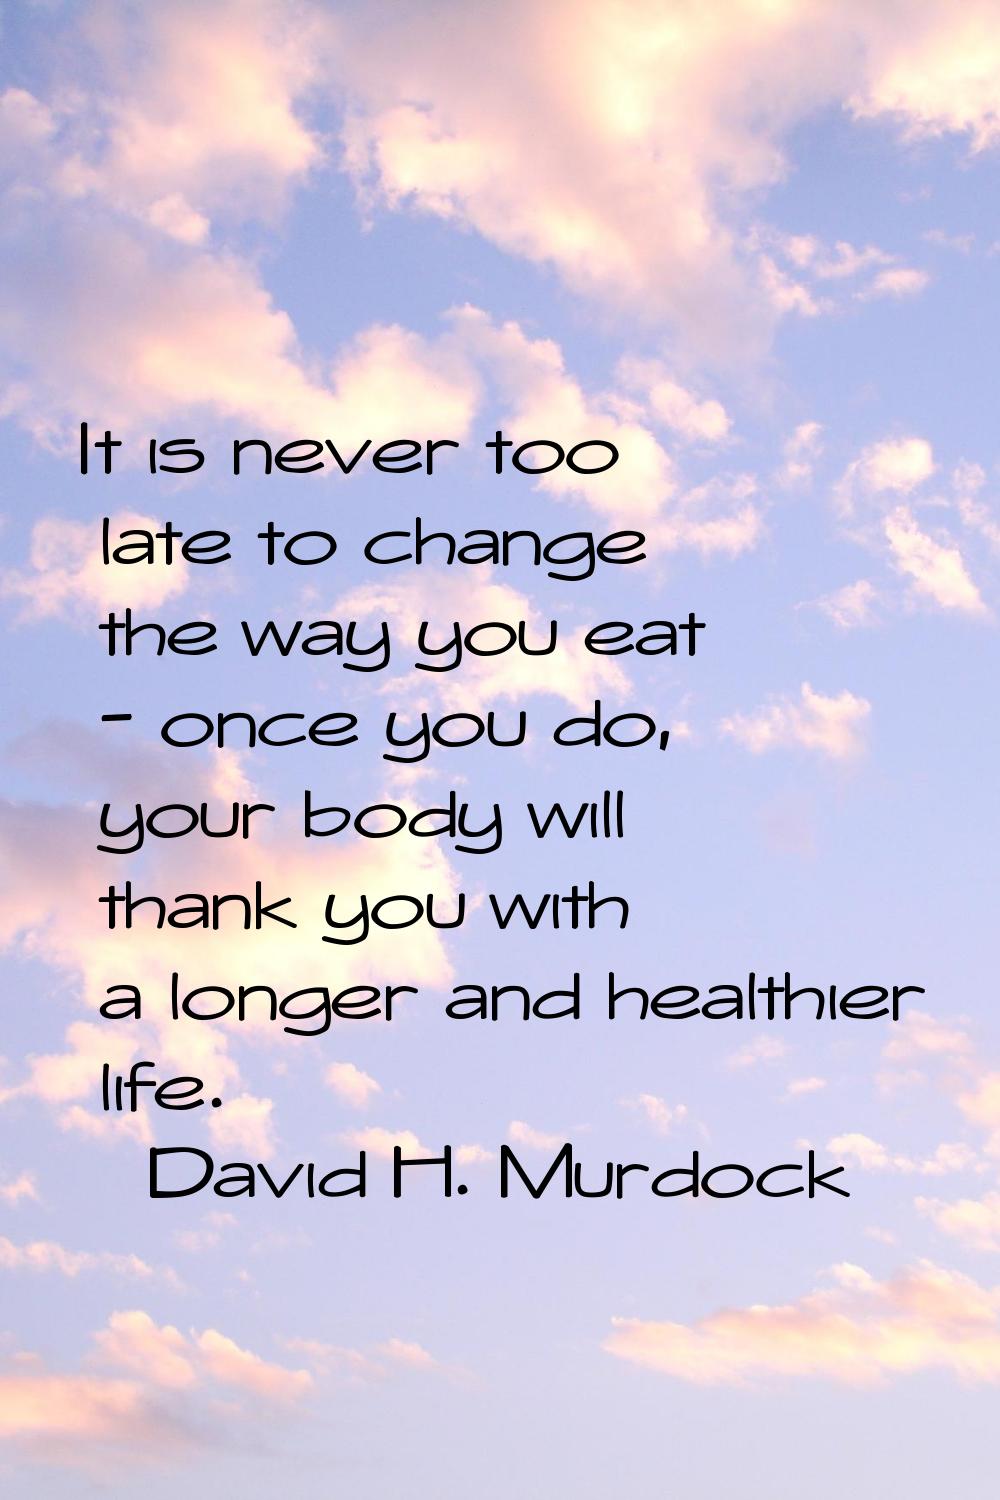 It is never too late to change the way you eat - once you do, your body will thank you with a longe